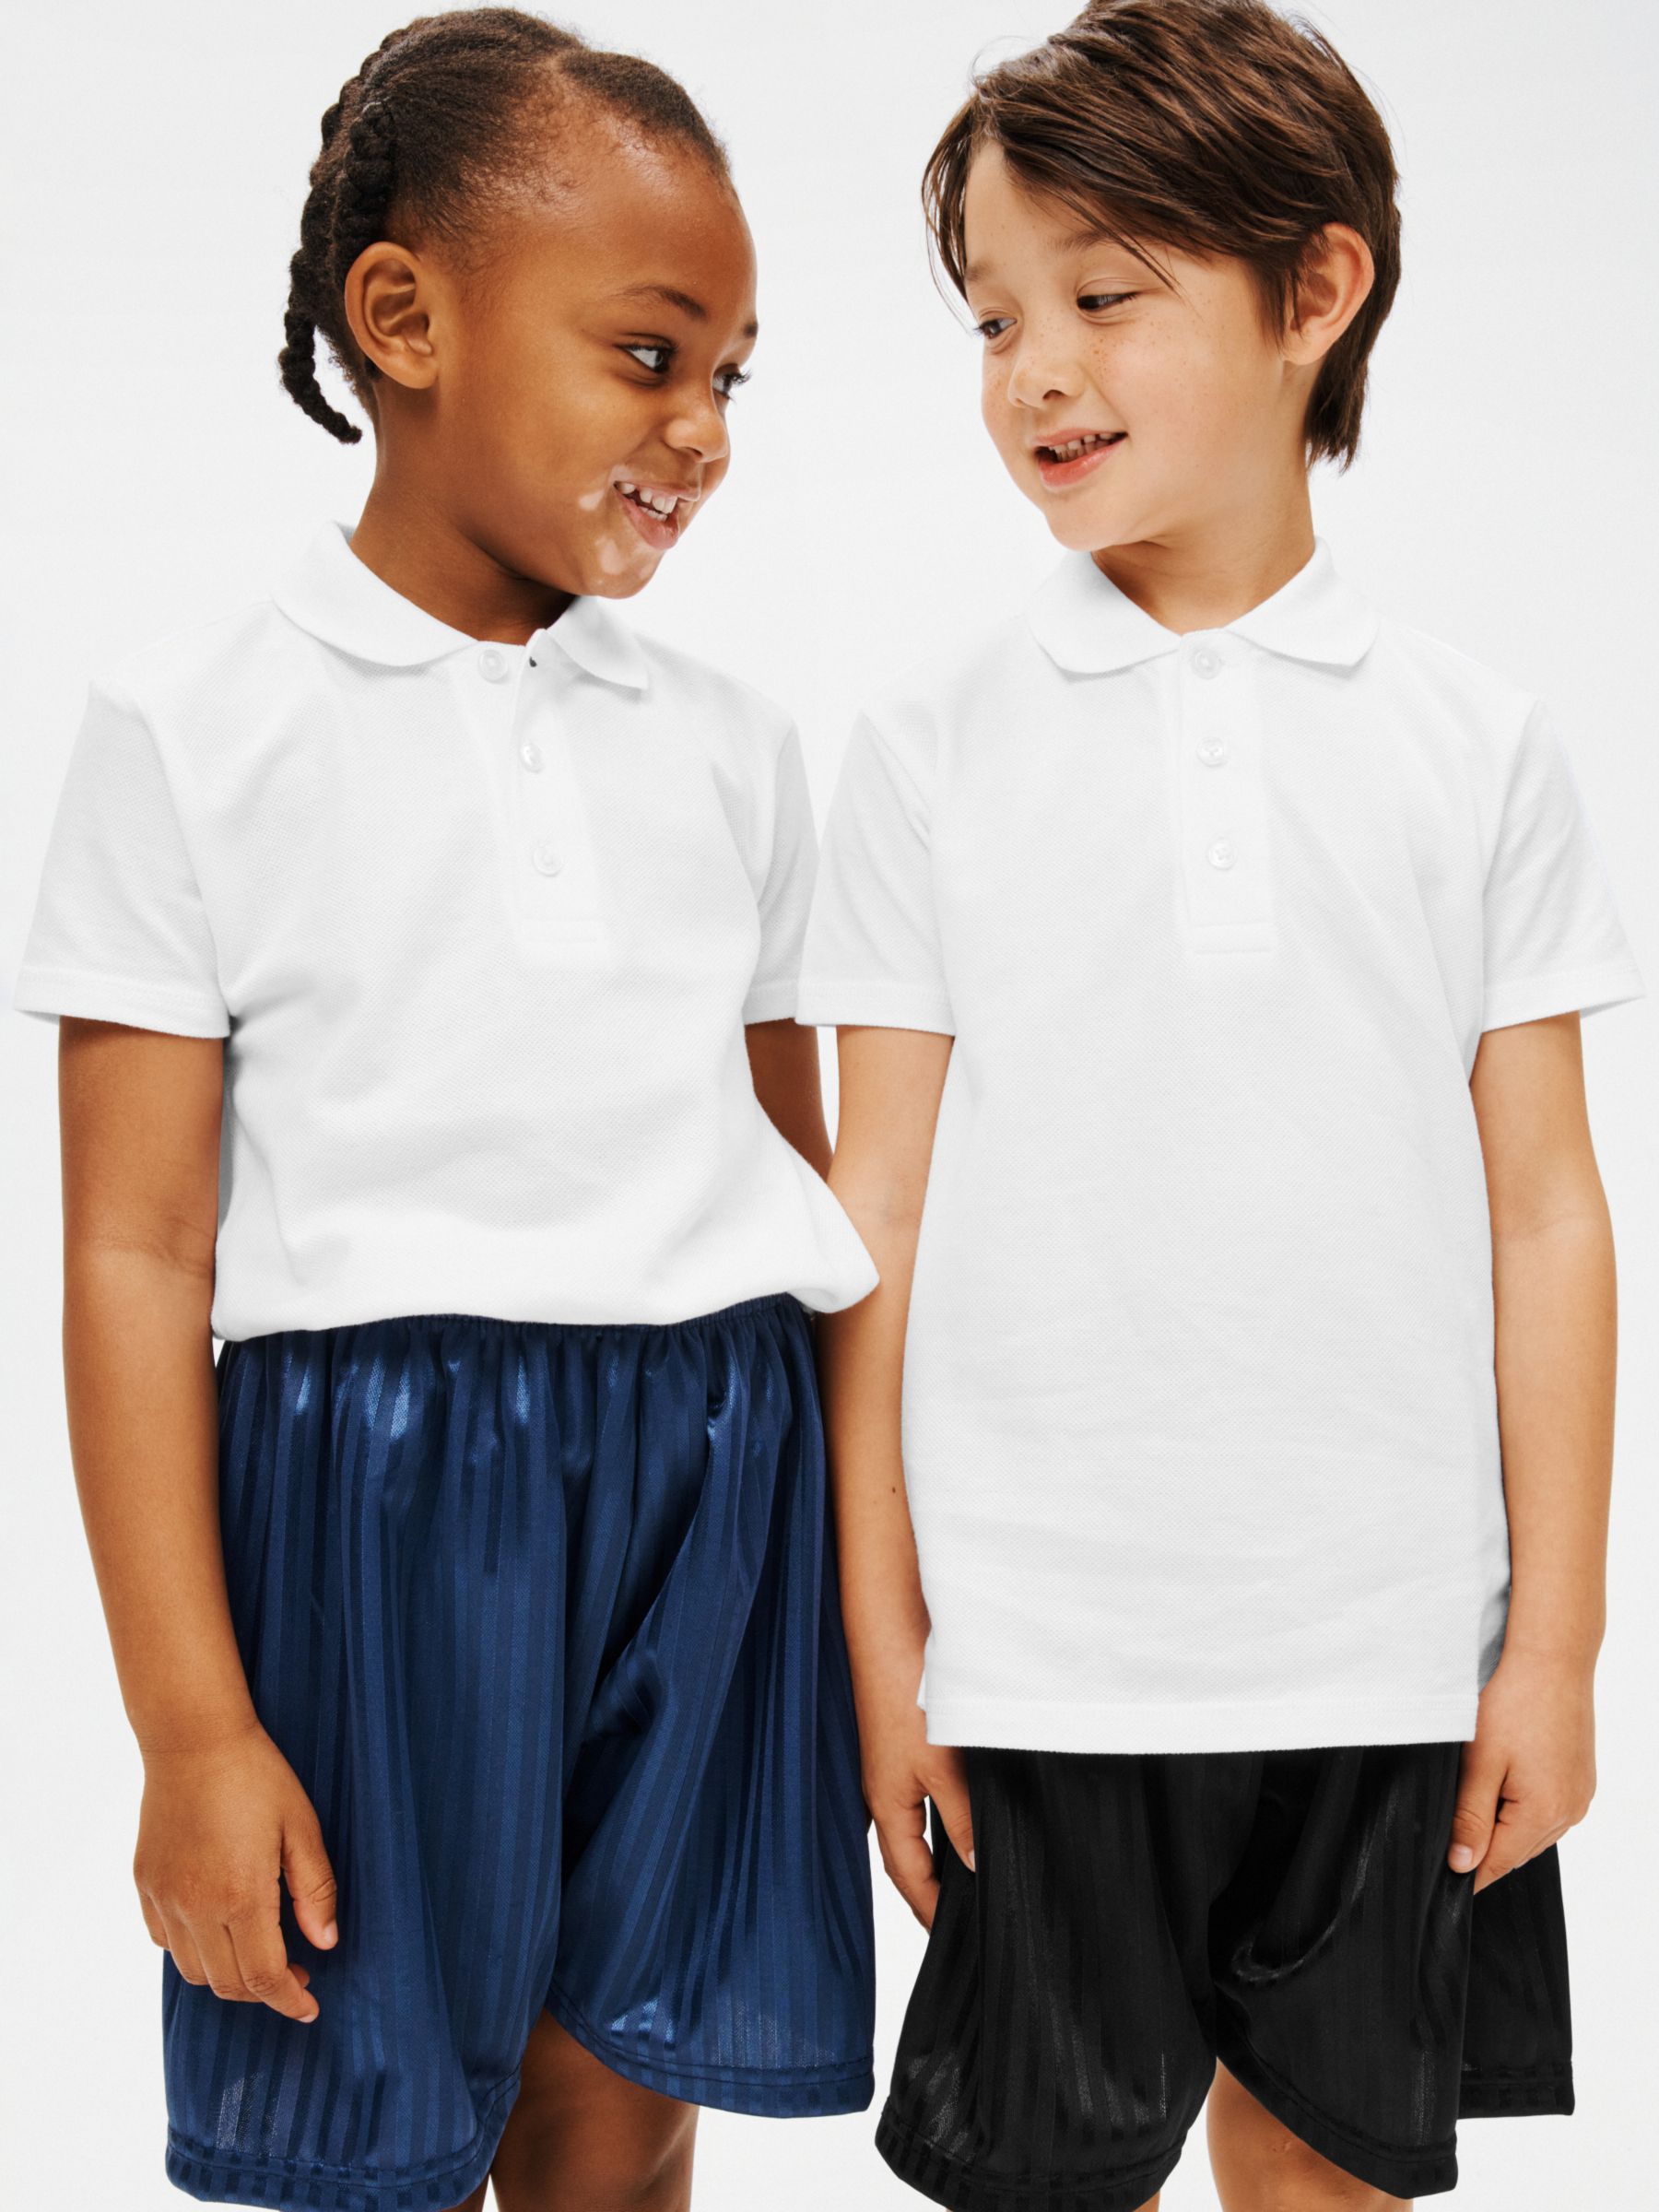 John Lewis Unisex Pure Cotton Easy Care School Polo Shirt, Pack of 2 ...